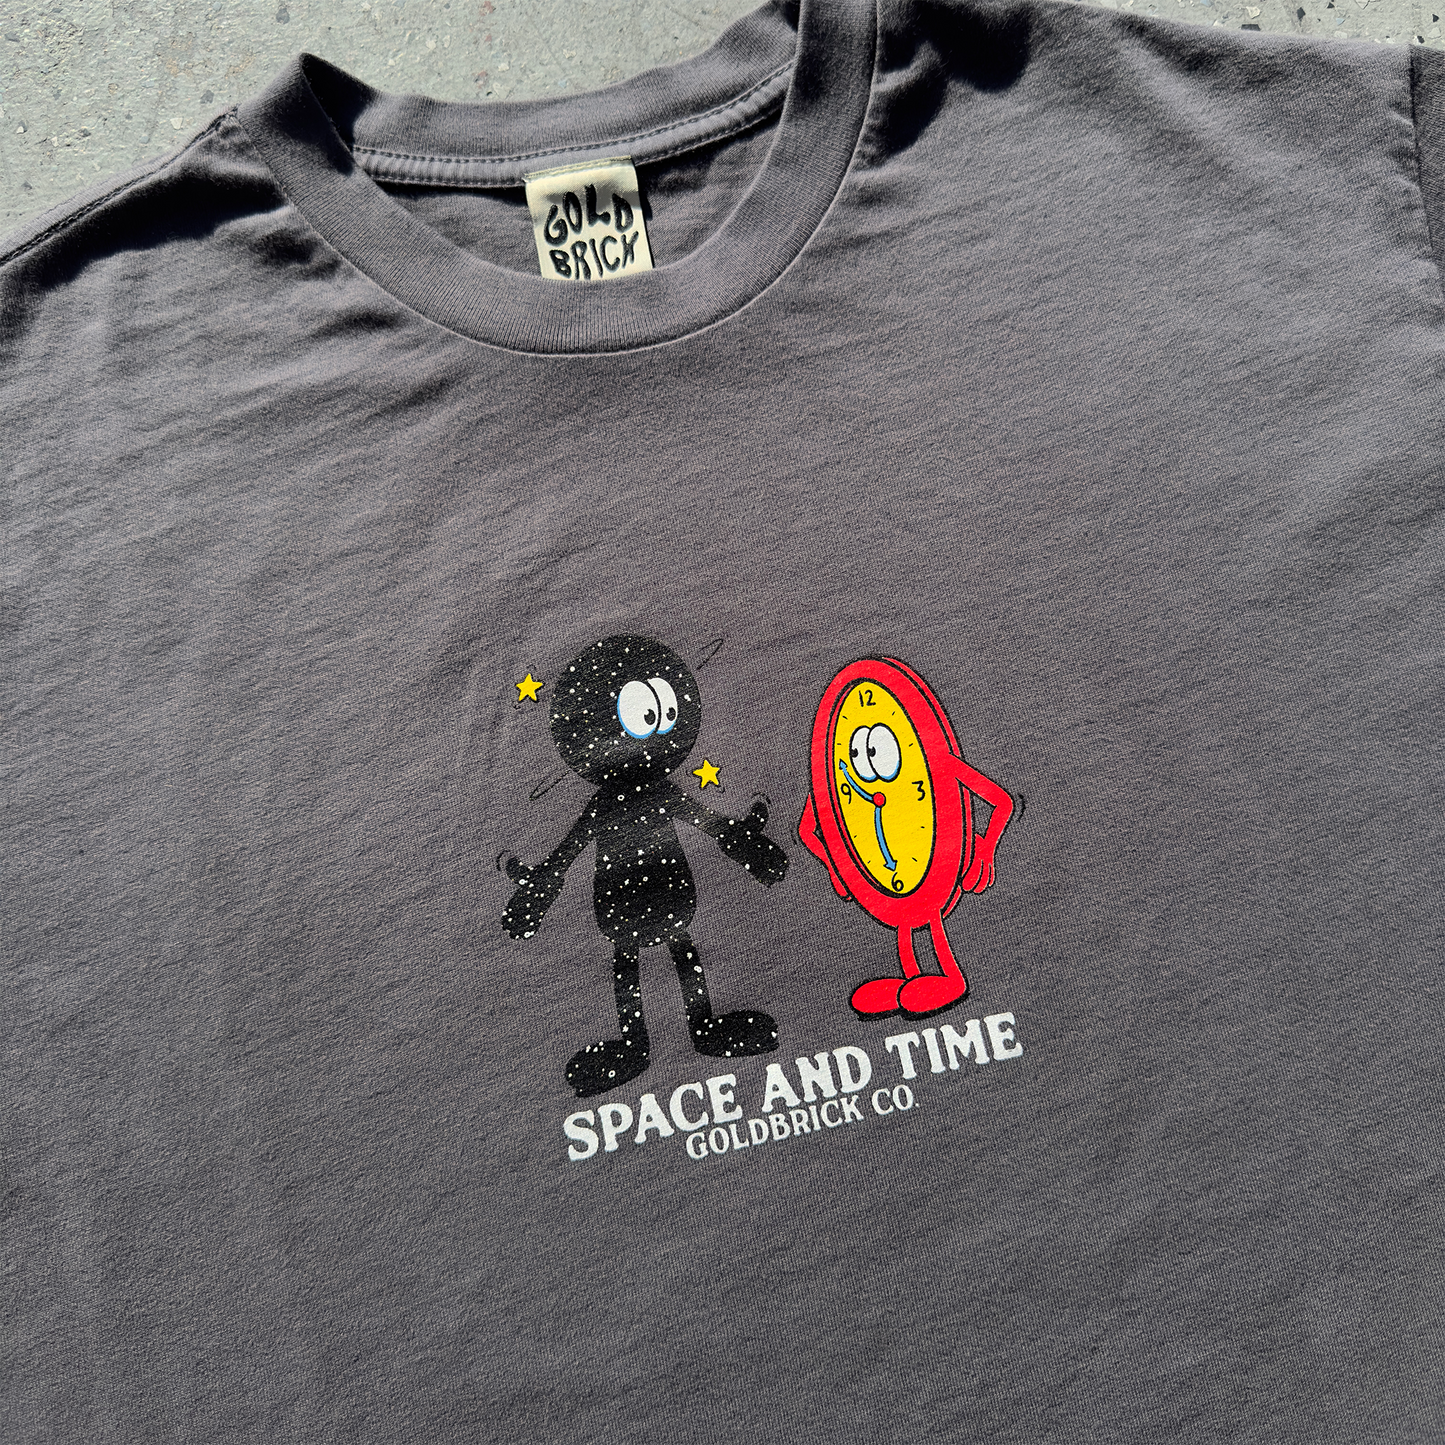 Space and Time T-Shirt